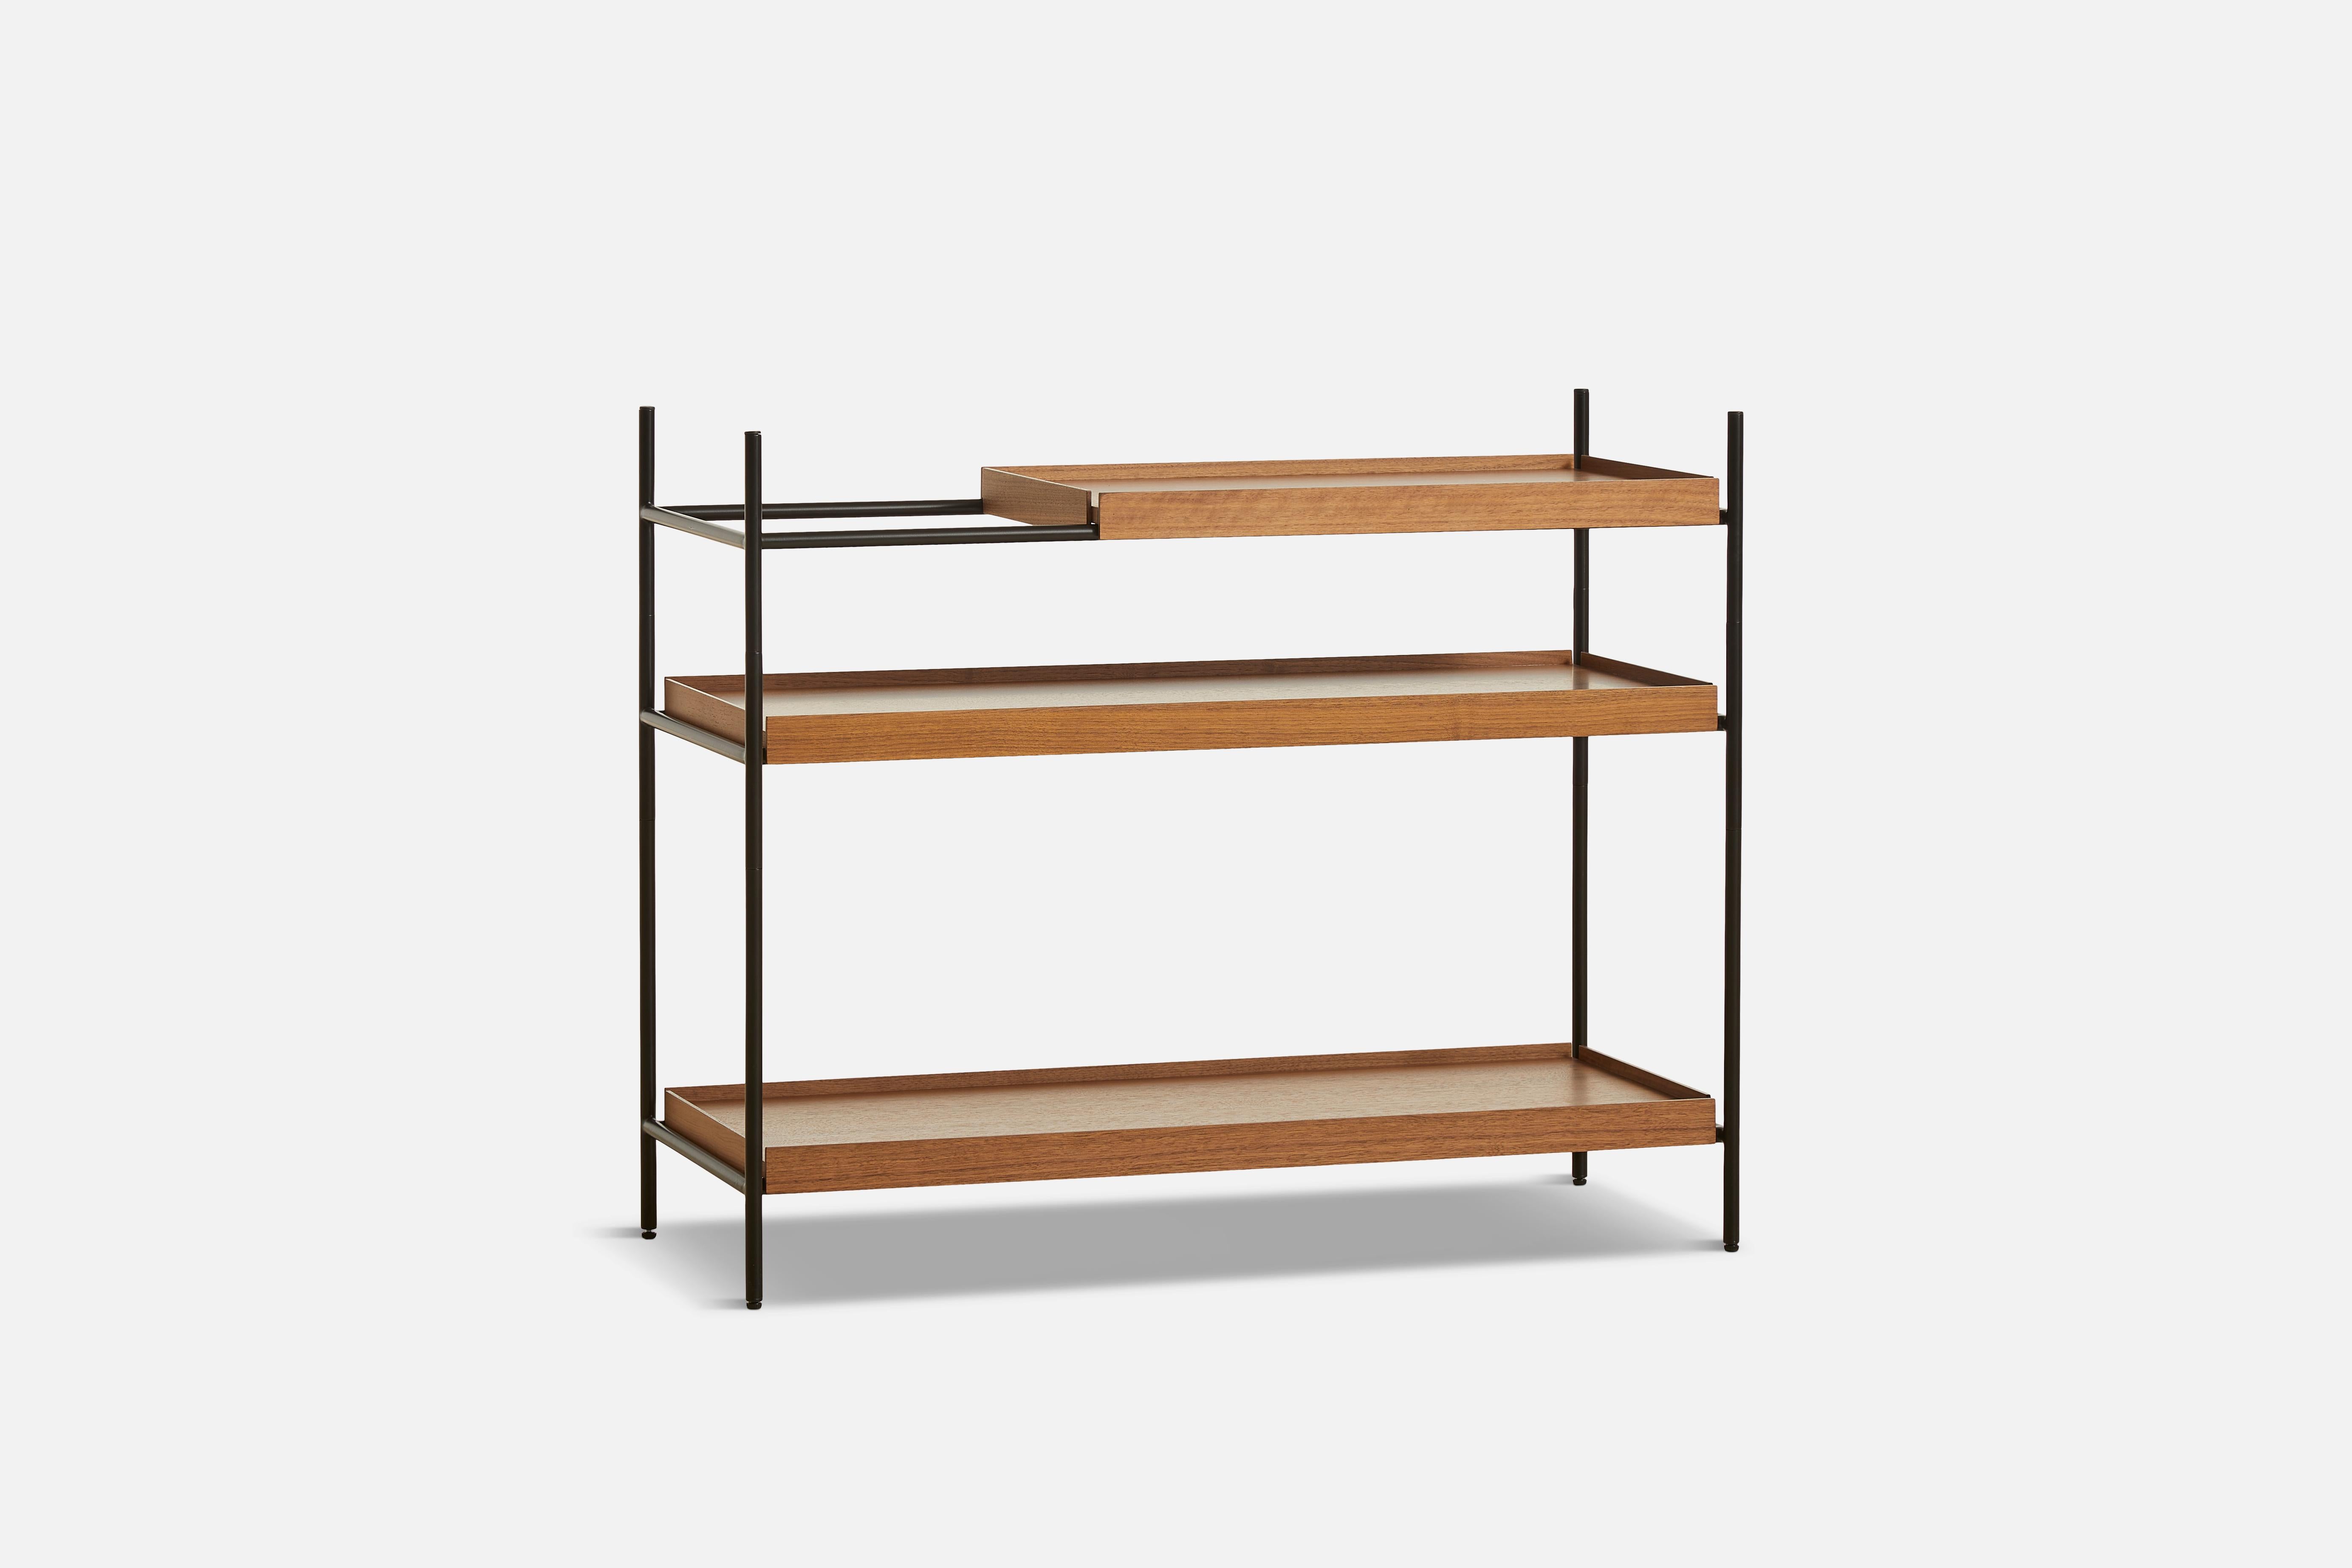 Low Walnut Tray shelf by Hanne Willmann
Materials: Metal, walnut.
Dimensions: D 40 x W 100 x H 81 cm
Also available in different tray conbinations and 2 sizes: H81, H 201 cm.

Hanne Willmann is a dynamic German designer with her own multidisciplinar